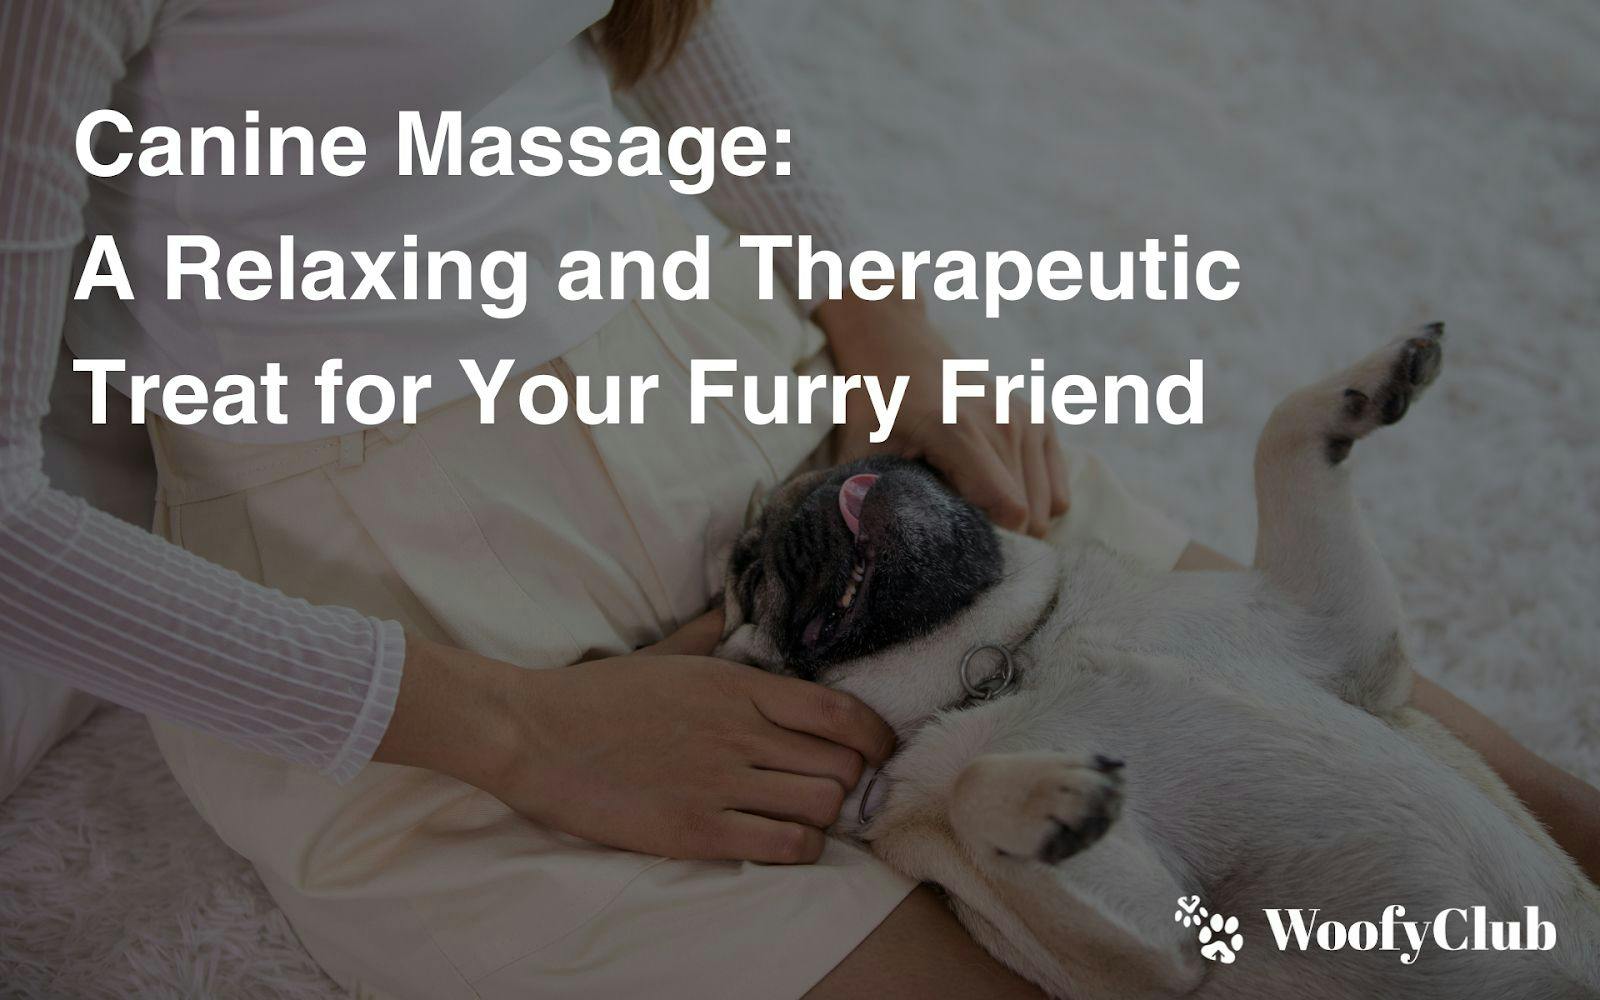 Canine Massage: A Relaxing And Therapeutic Treat For Your Furry Friend